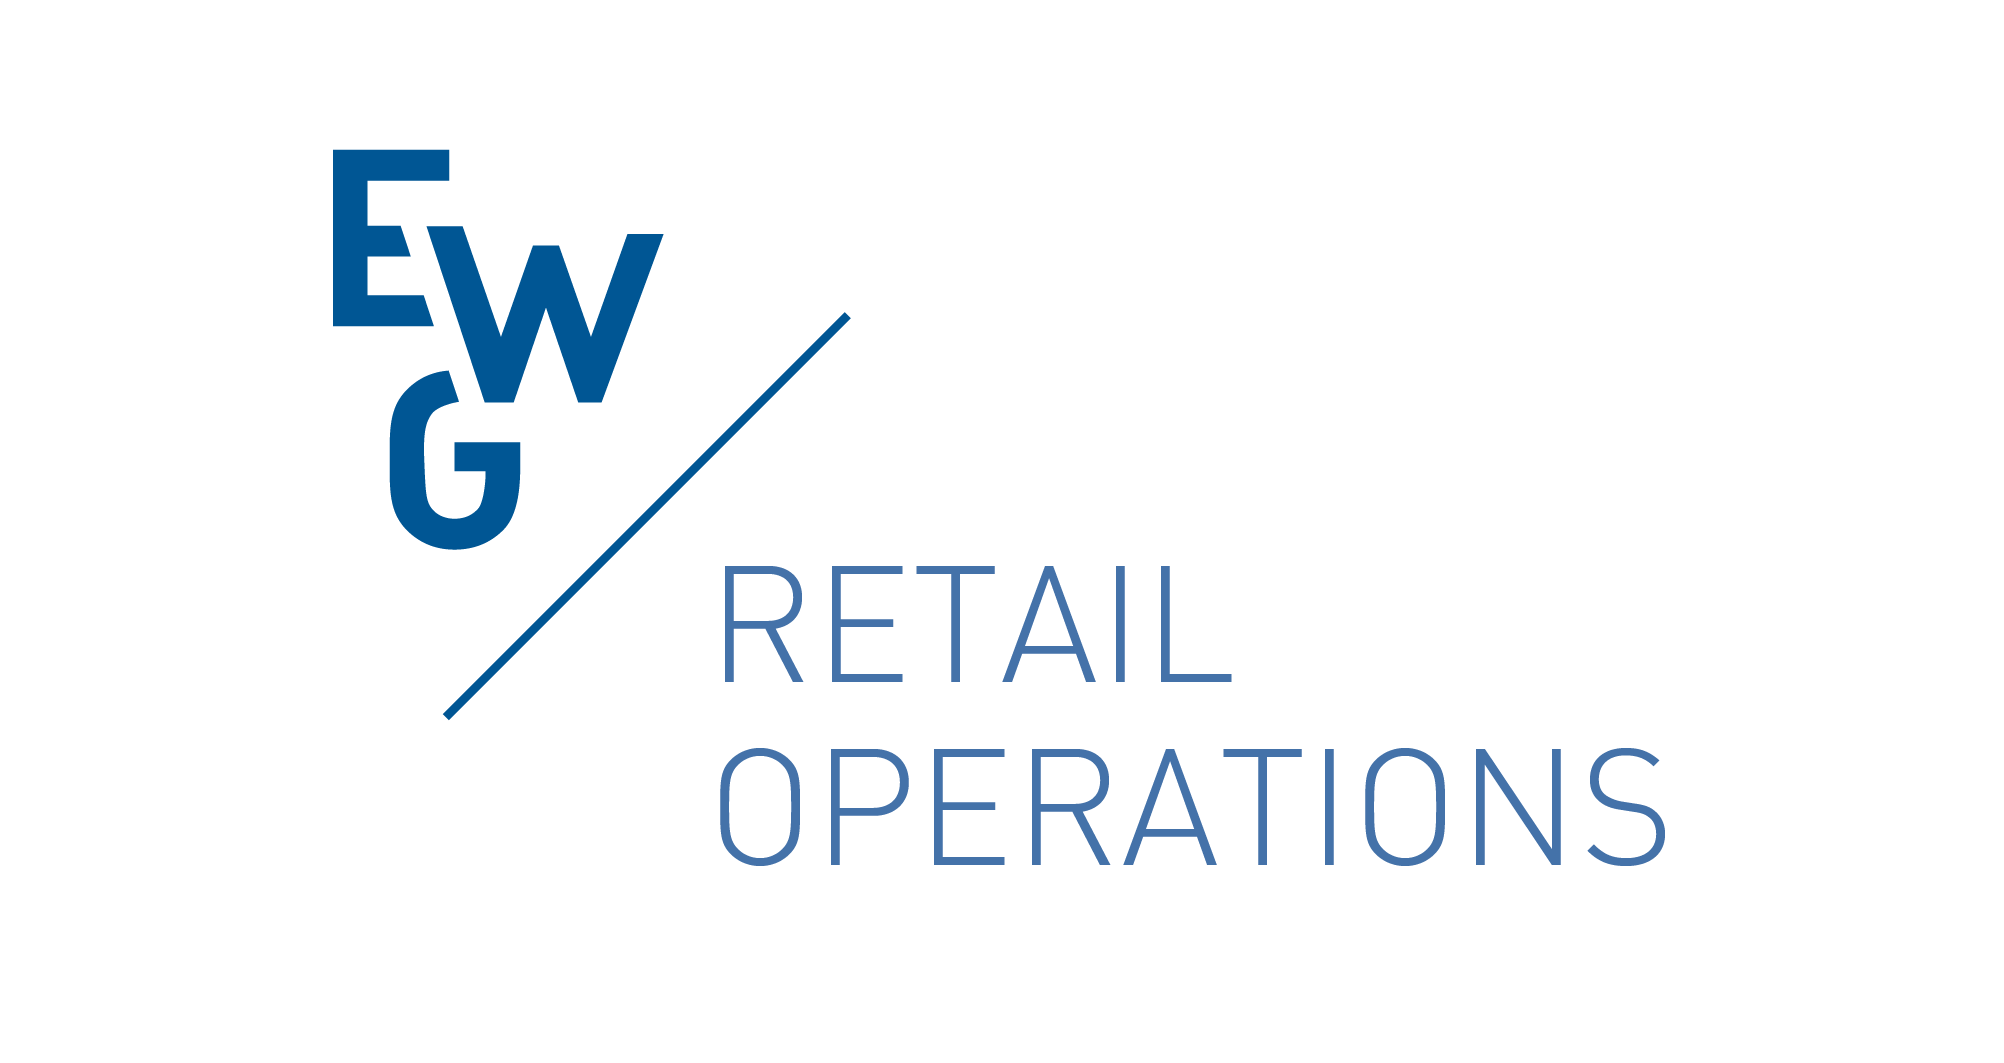 EURO working group on Retail Operations